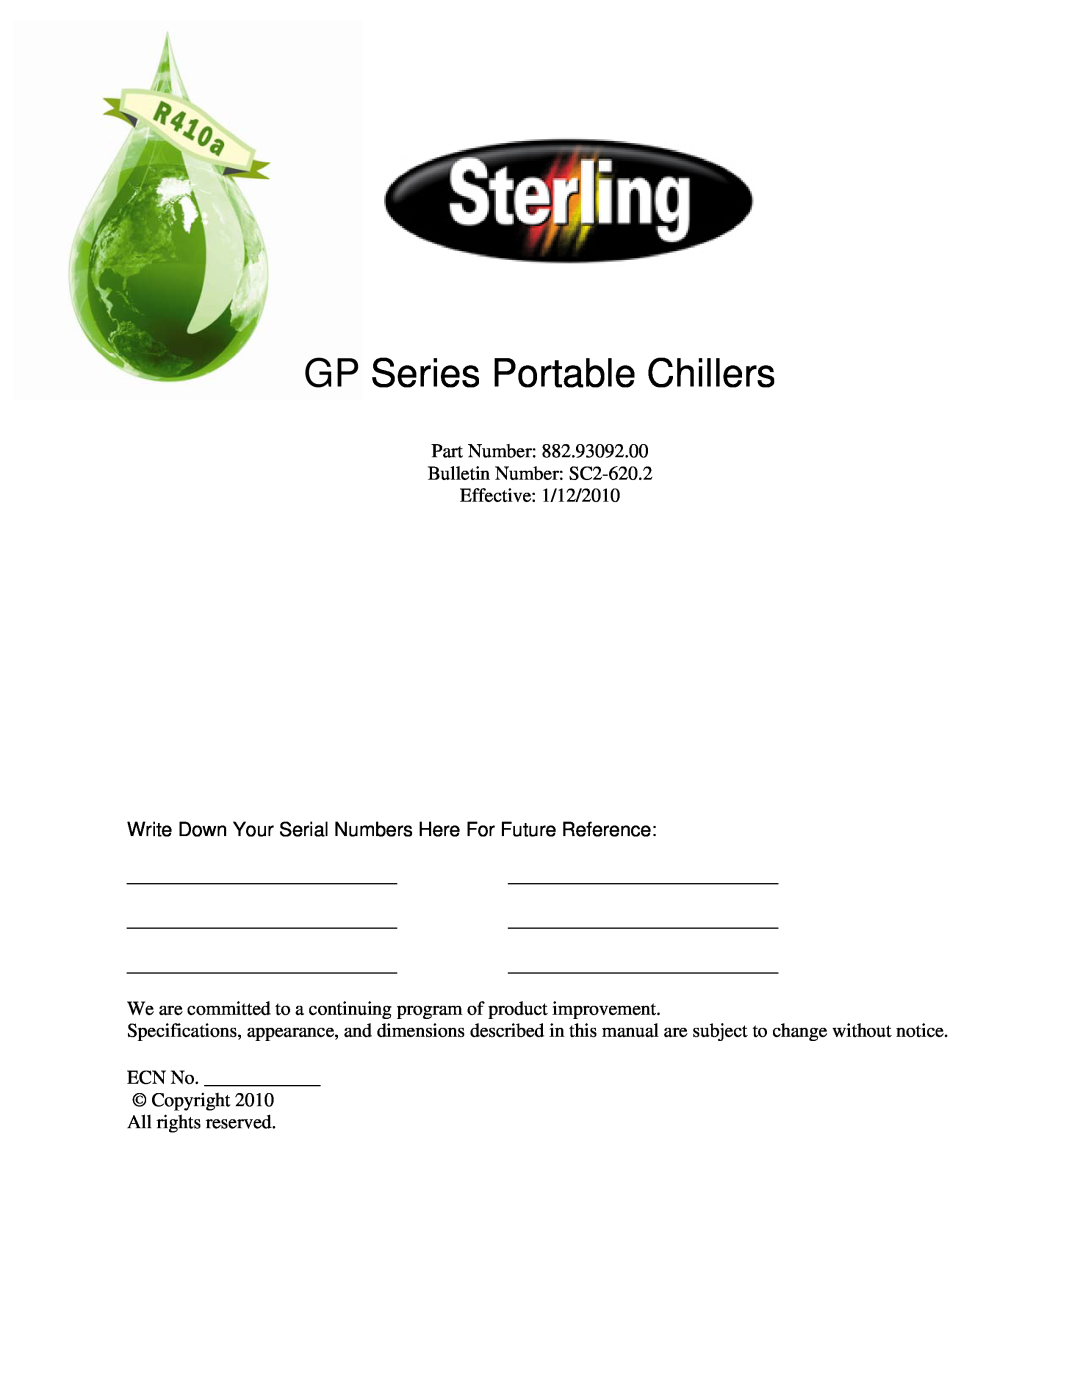 Sterling 882.93092.00 specifications GP Series Portable Chillers, ECN No Copyright 2010 All rights reserved 